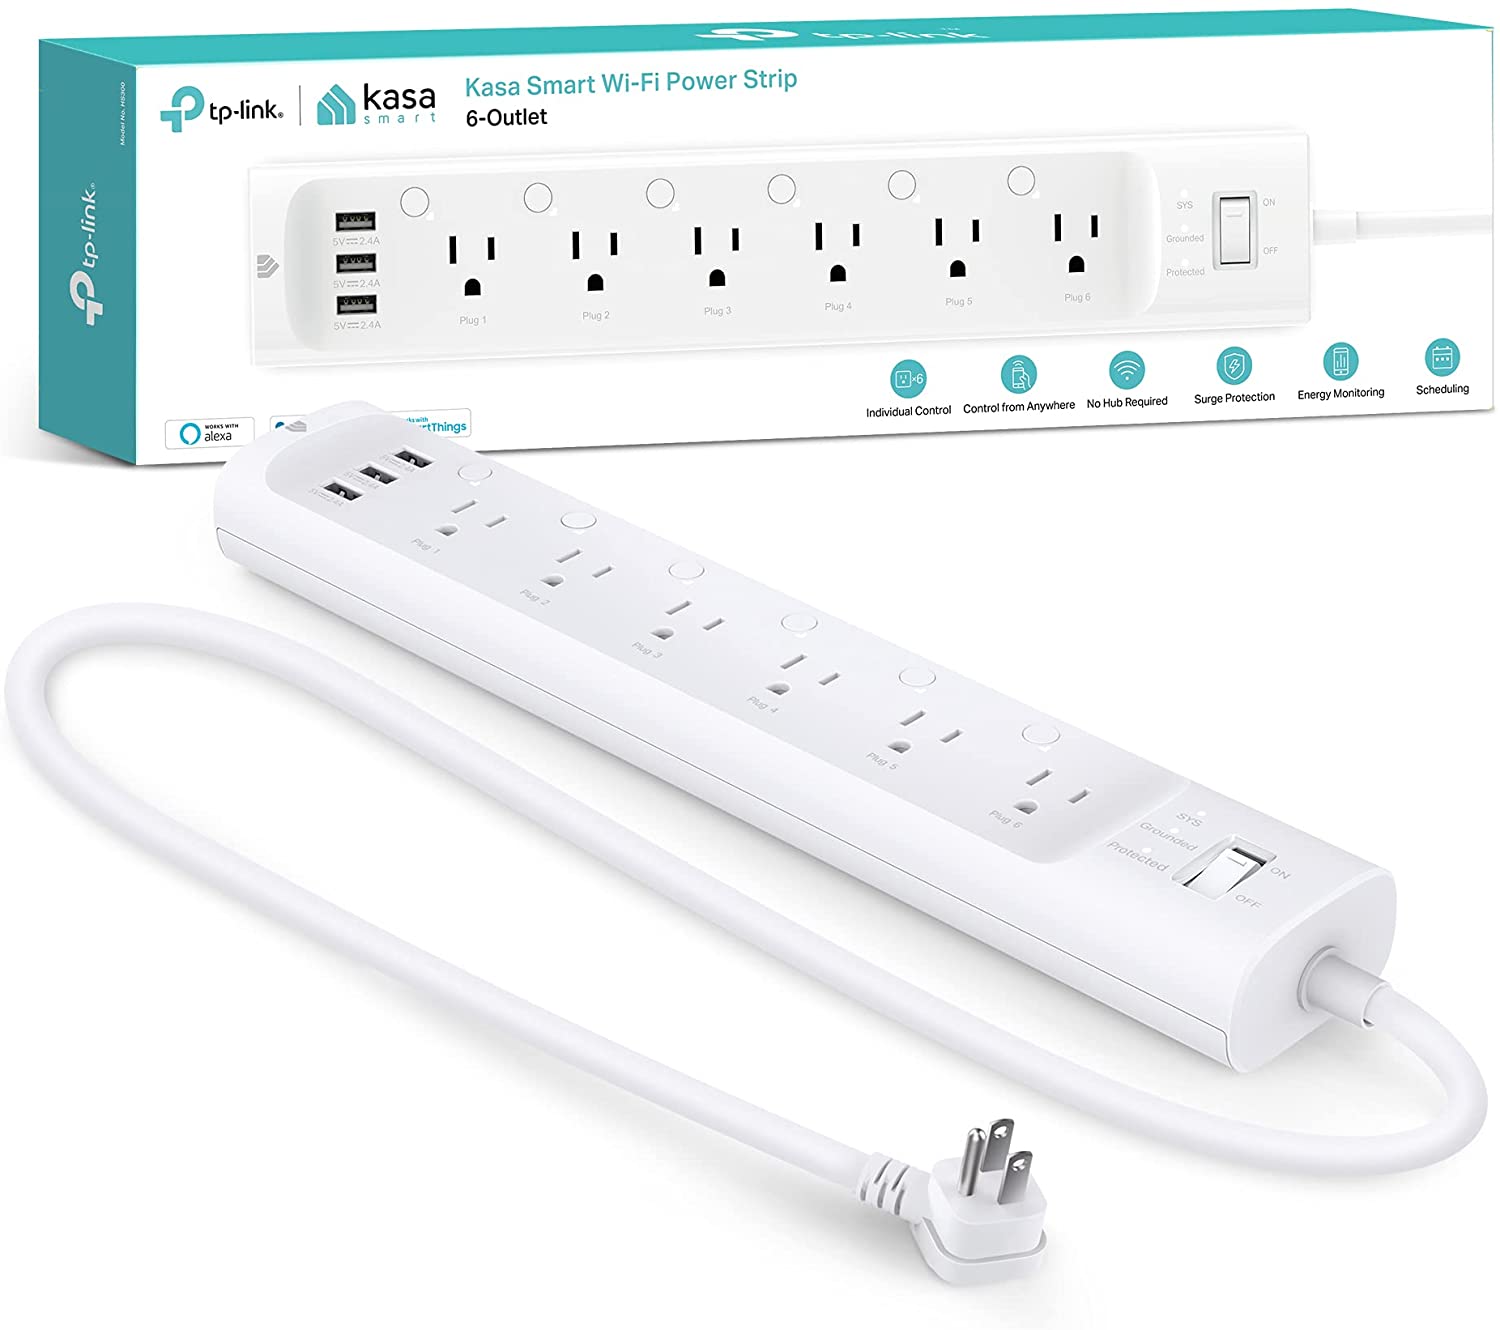 TP-Link Kasa HS300 6-Outlet Smart WiFi Power Strip w/ 3 USB Ports $50 & More - Free Shipping